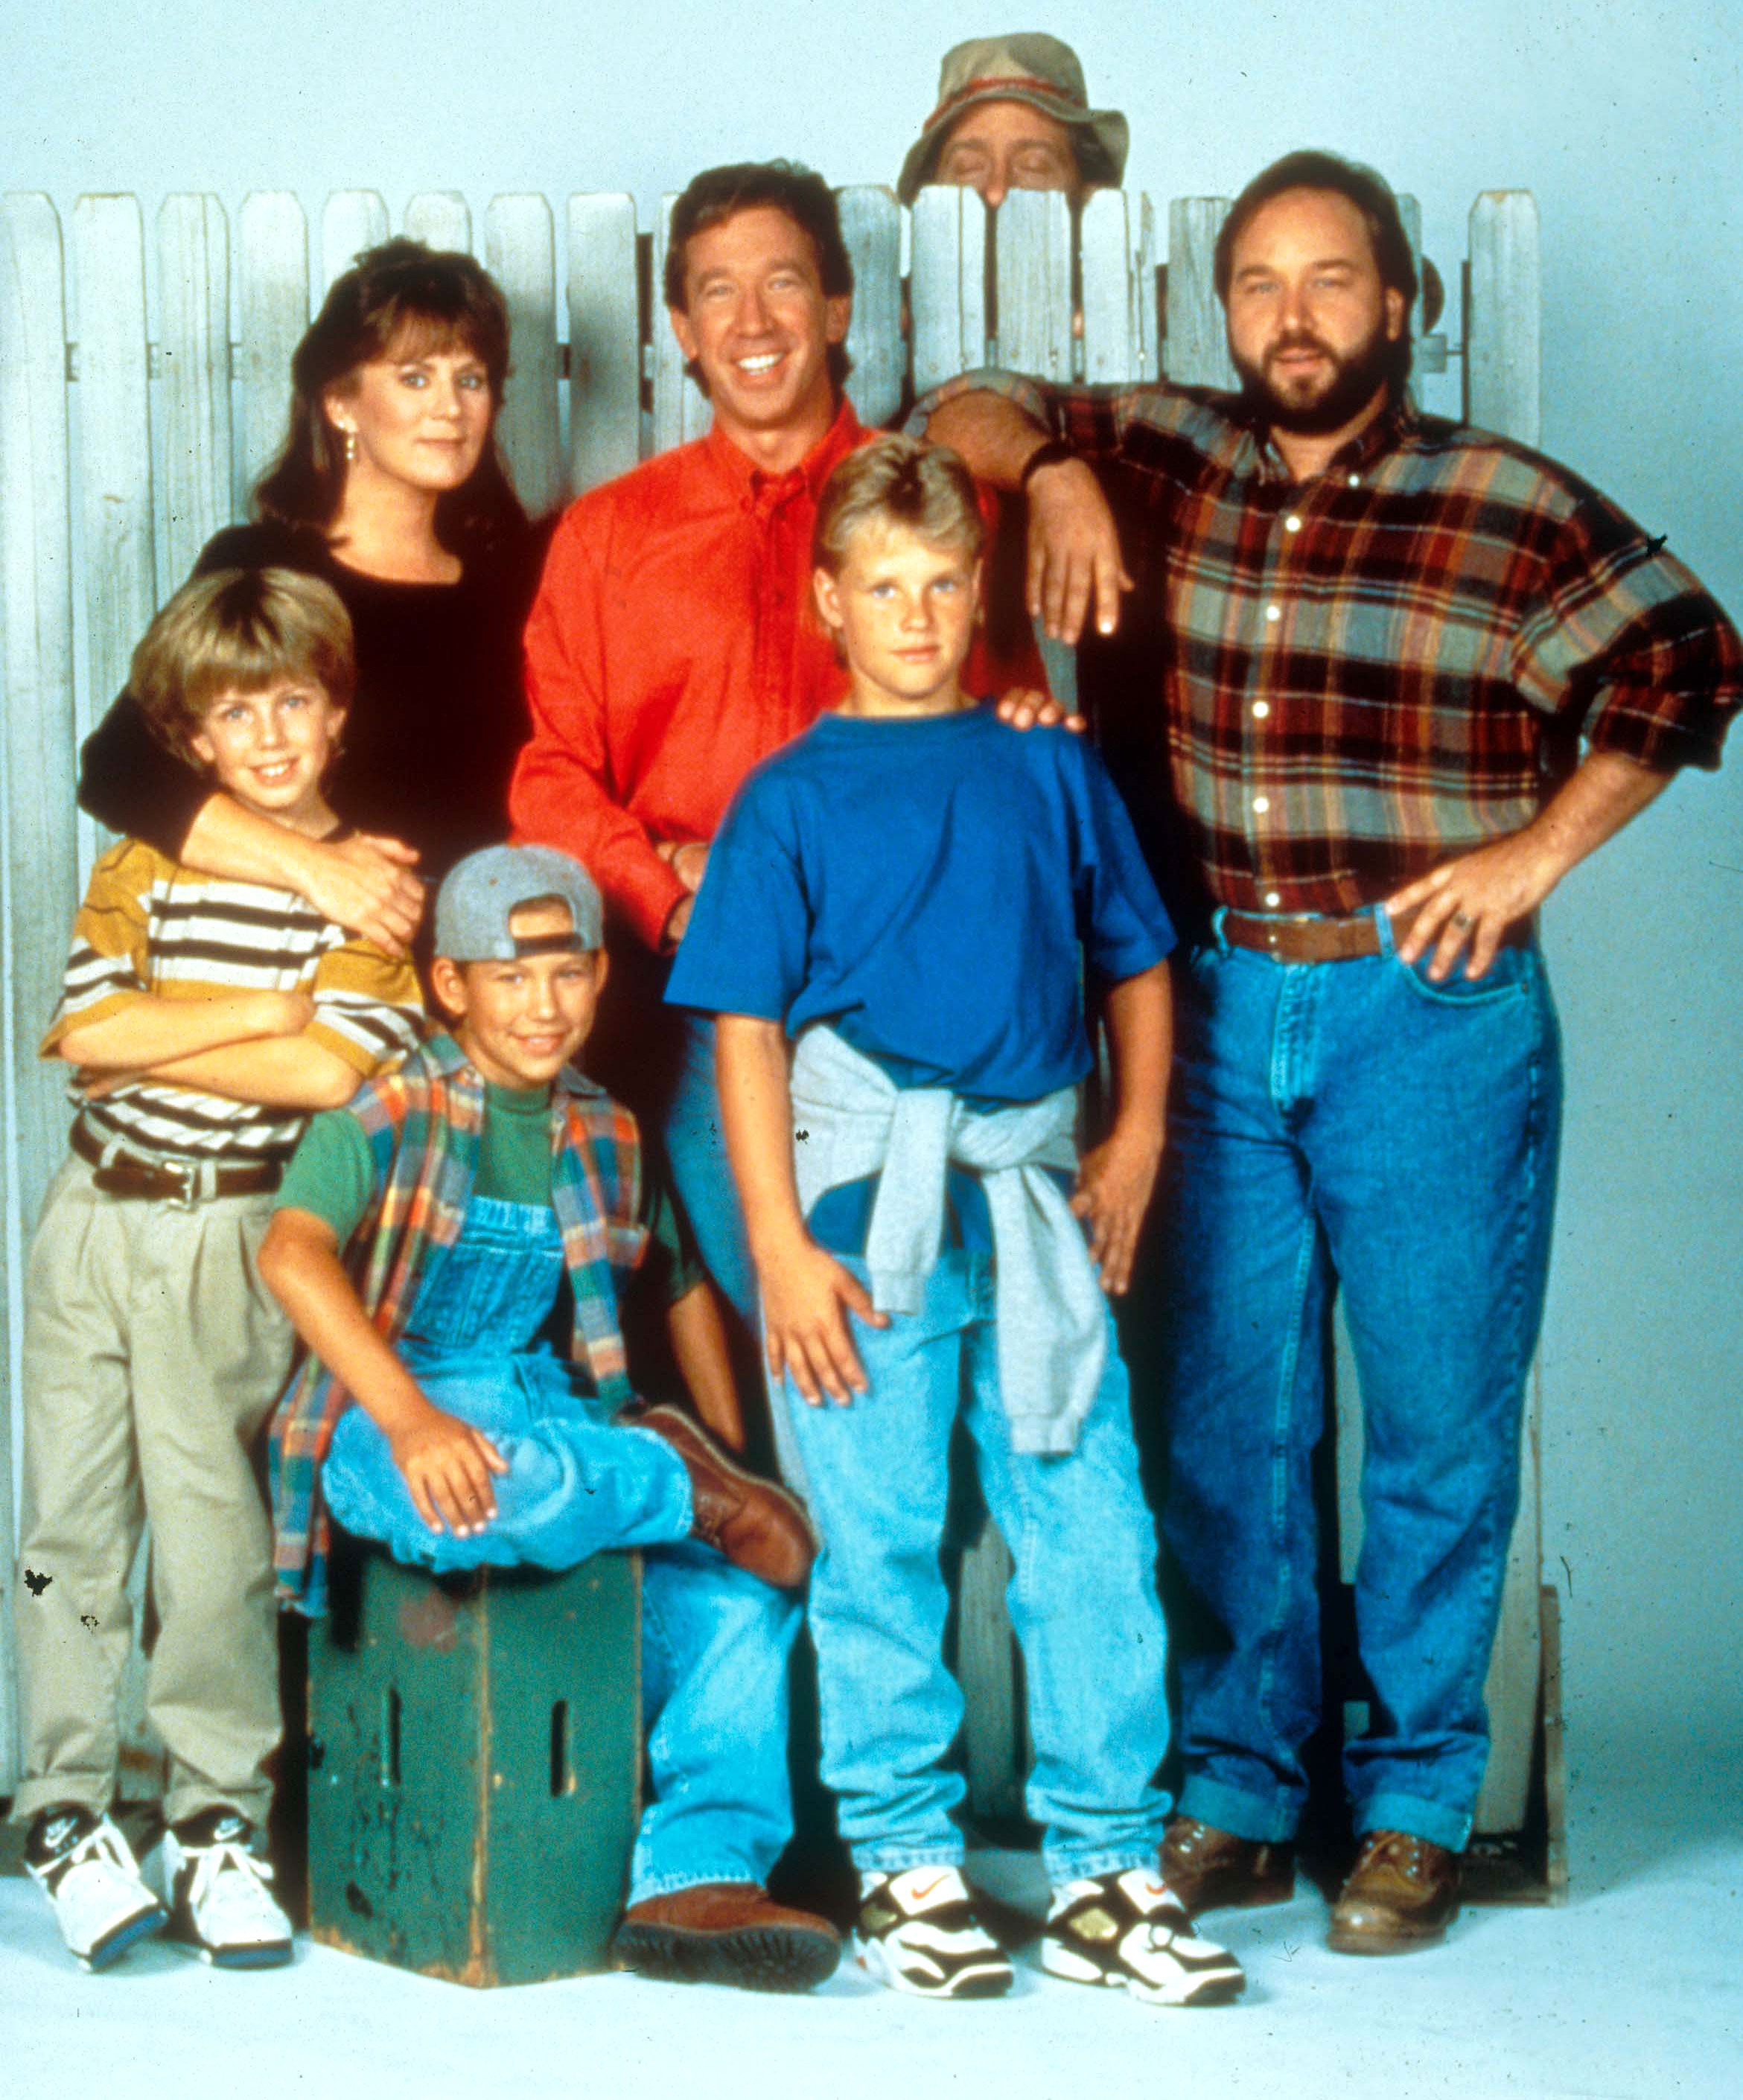 Home Improvement Cast Where Are They Now